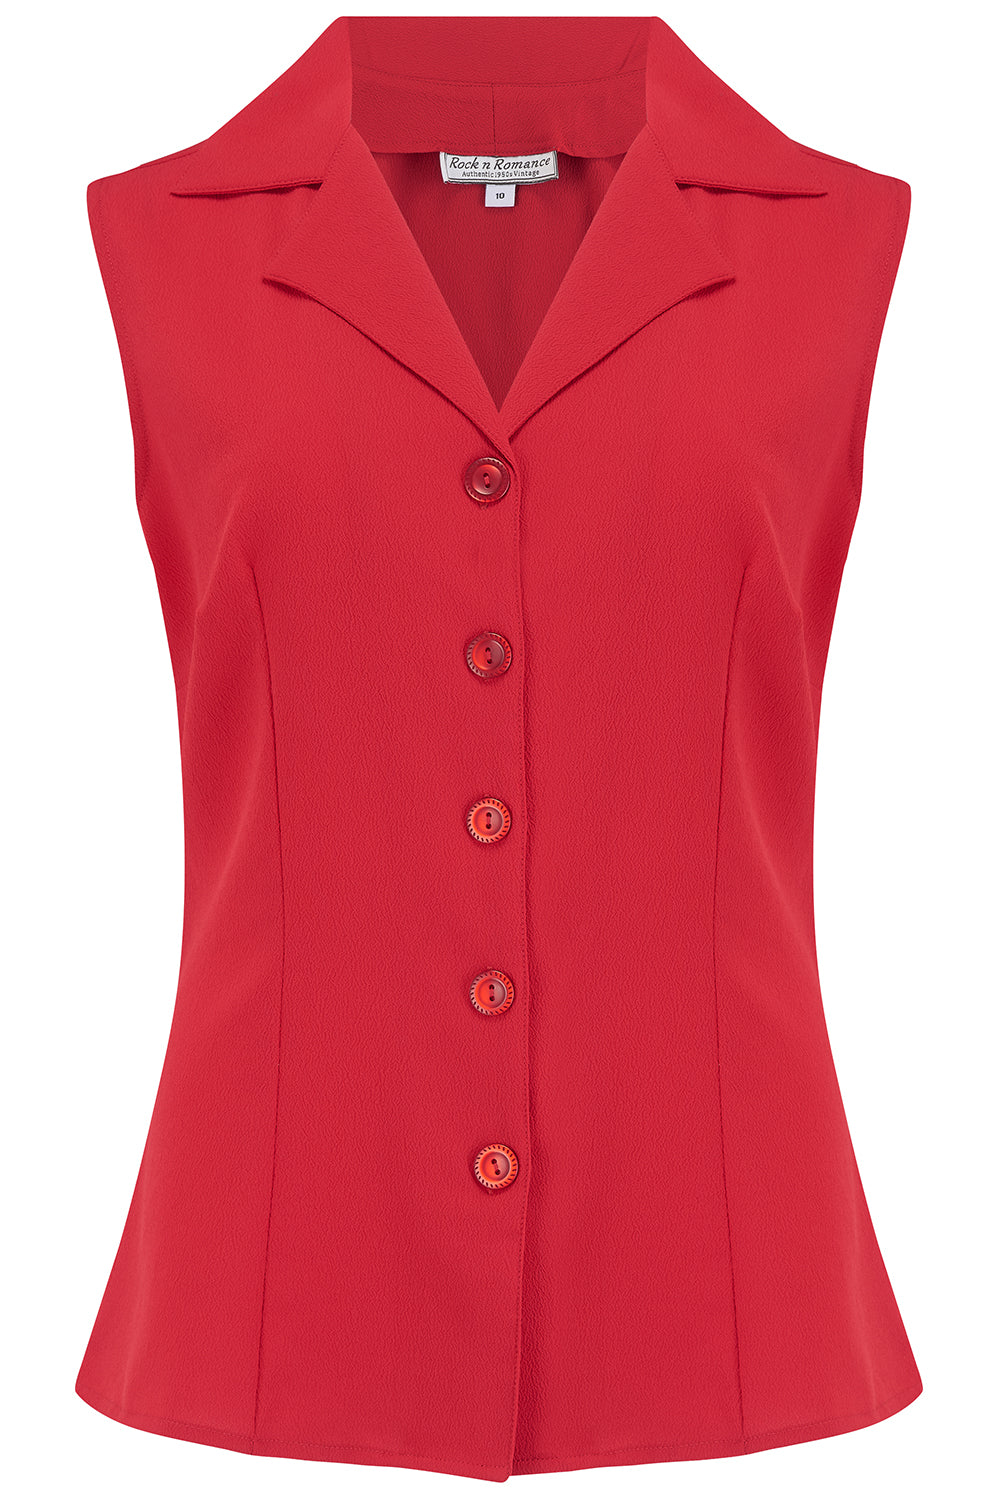 **Sample Sale** The "Gladys" Sleeveless Summer Blouse in Solid Red, Classic Vintage 1950s Inspired Style